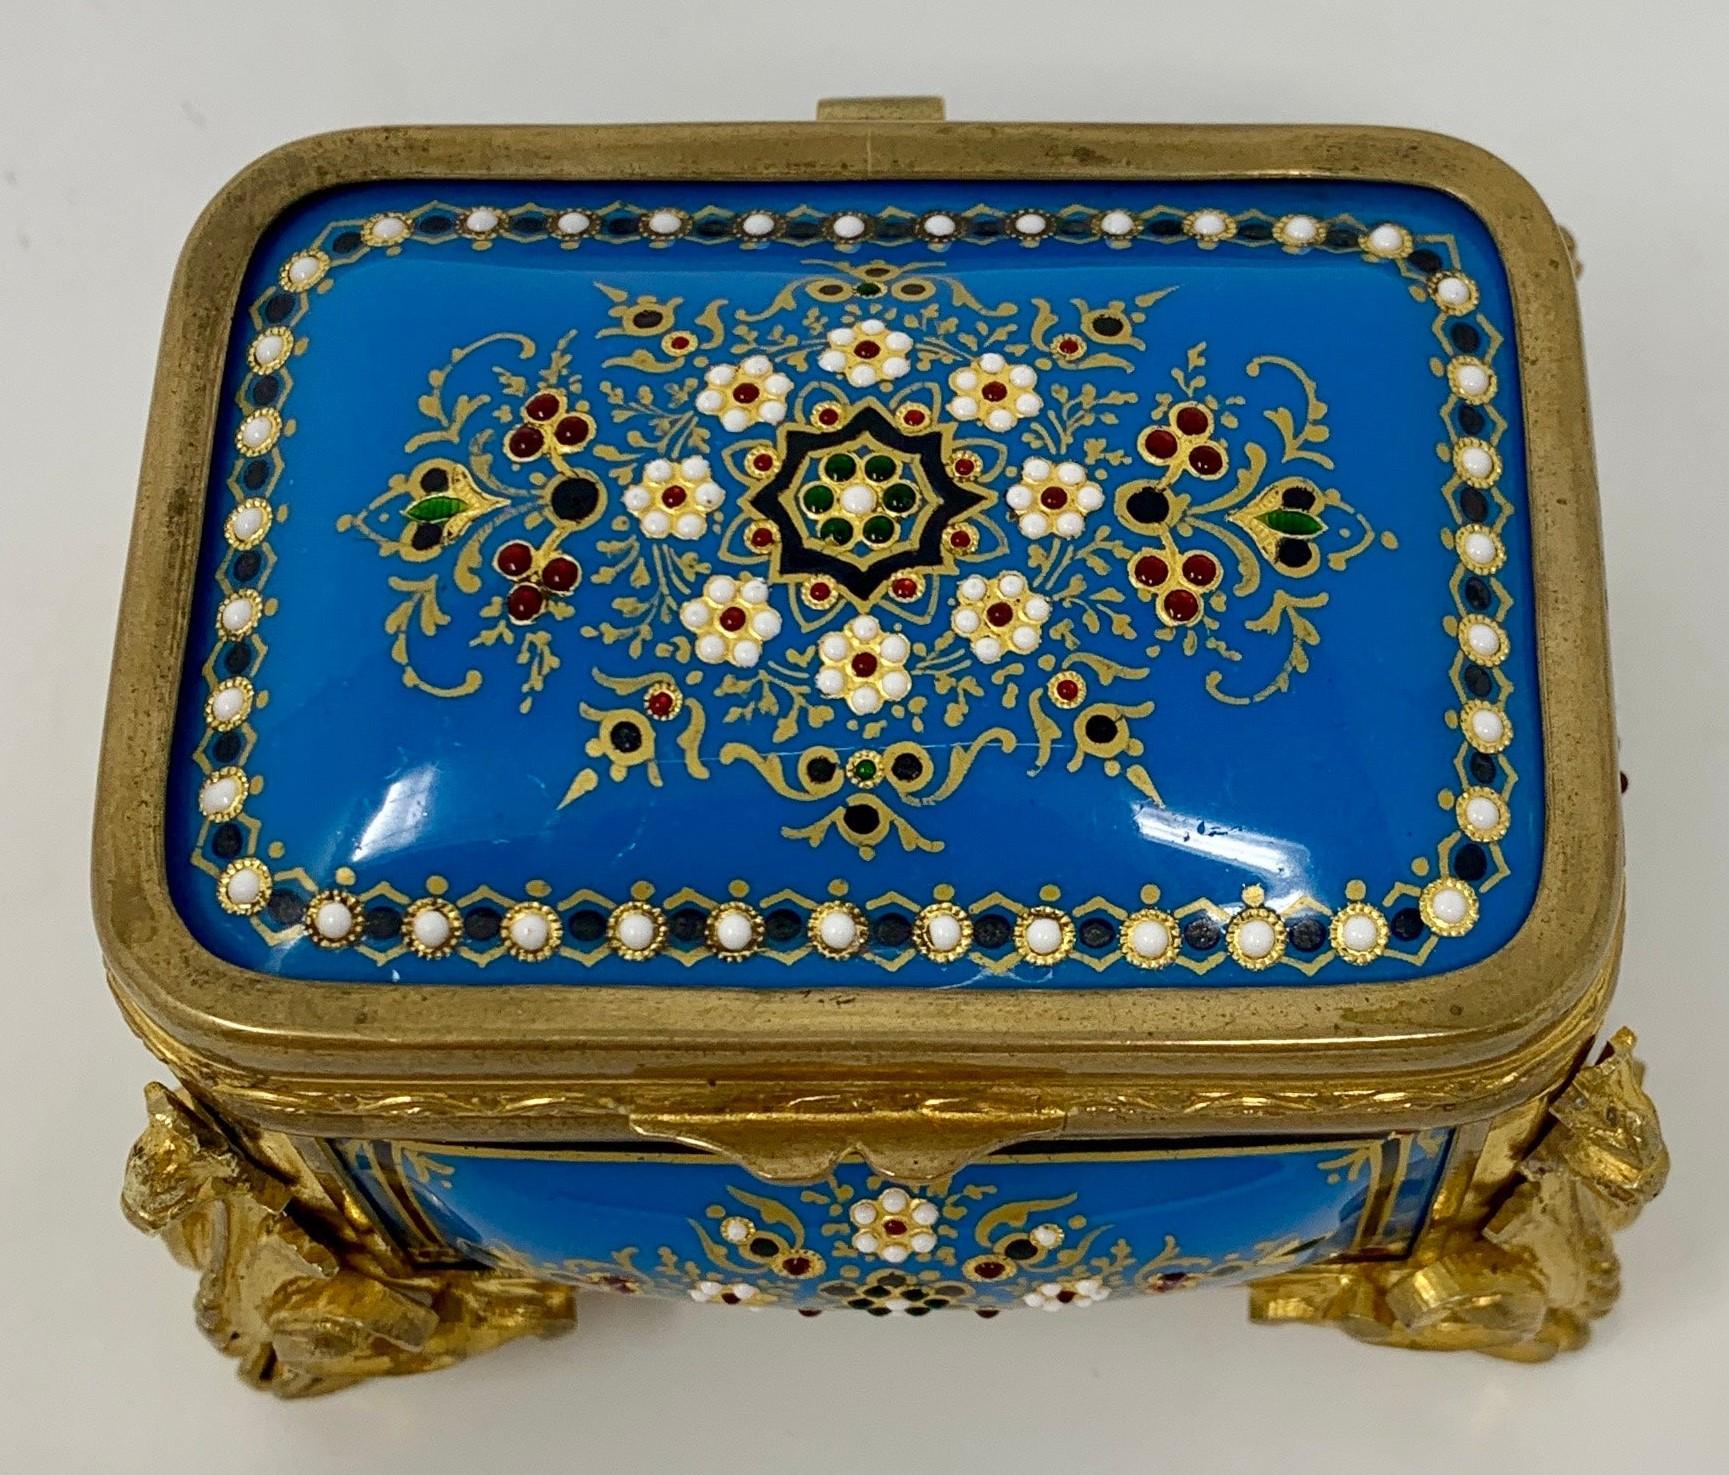 This is a very petite little jewel of an enameled box. The interior fabric has not been replaced. The ormolu and enameling is finely rendered.